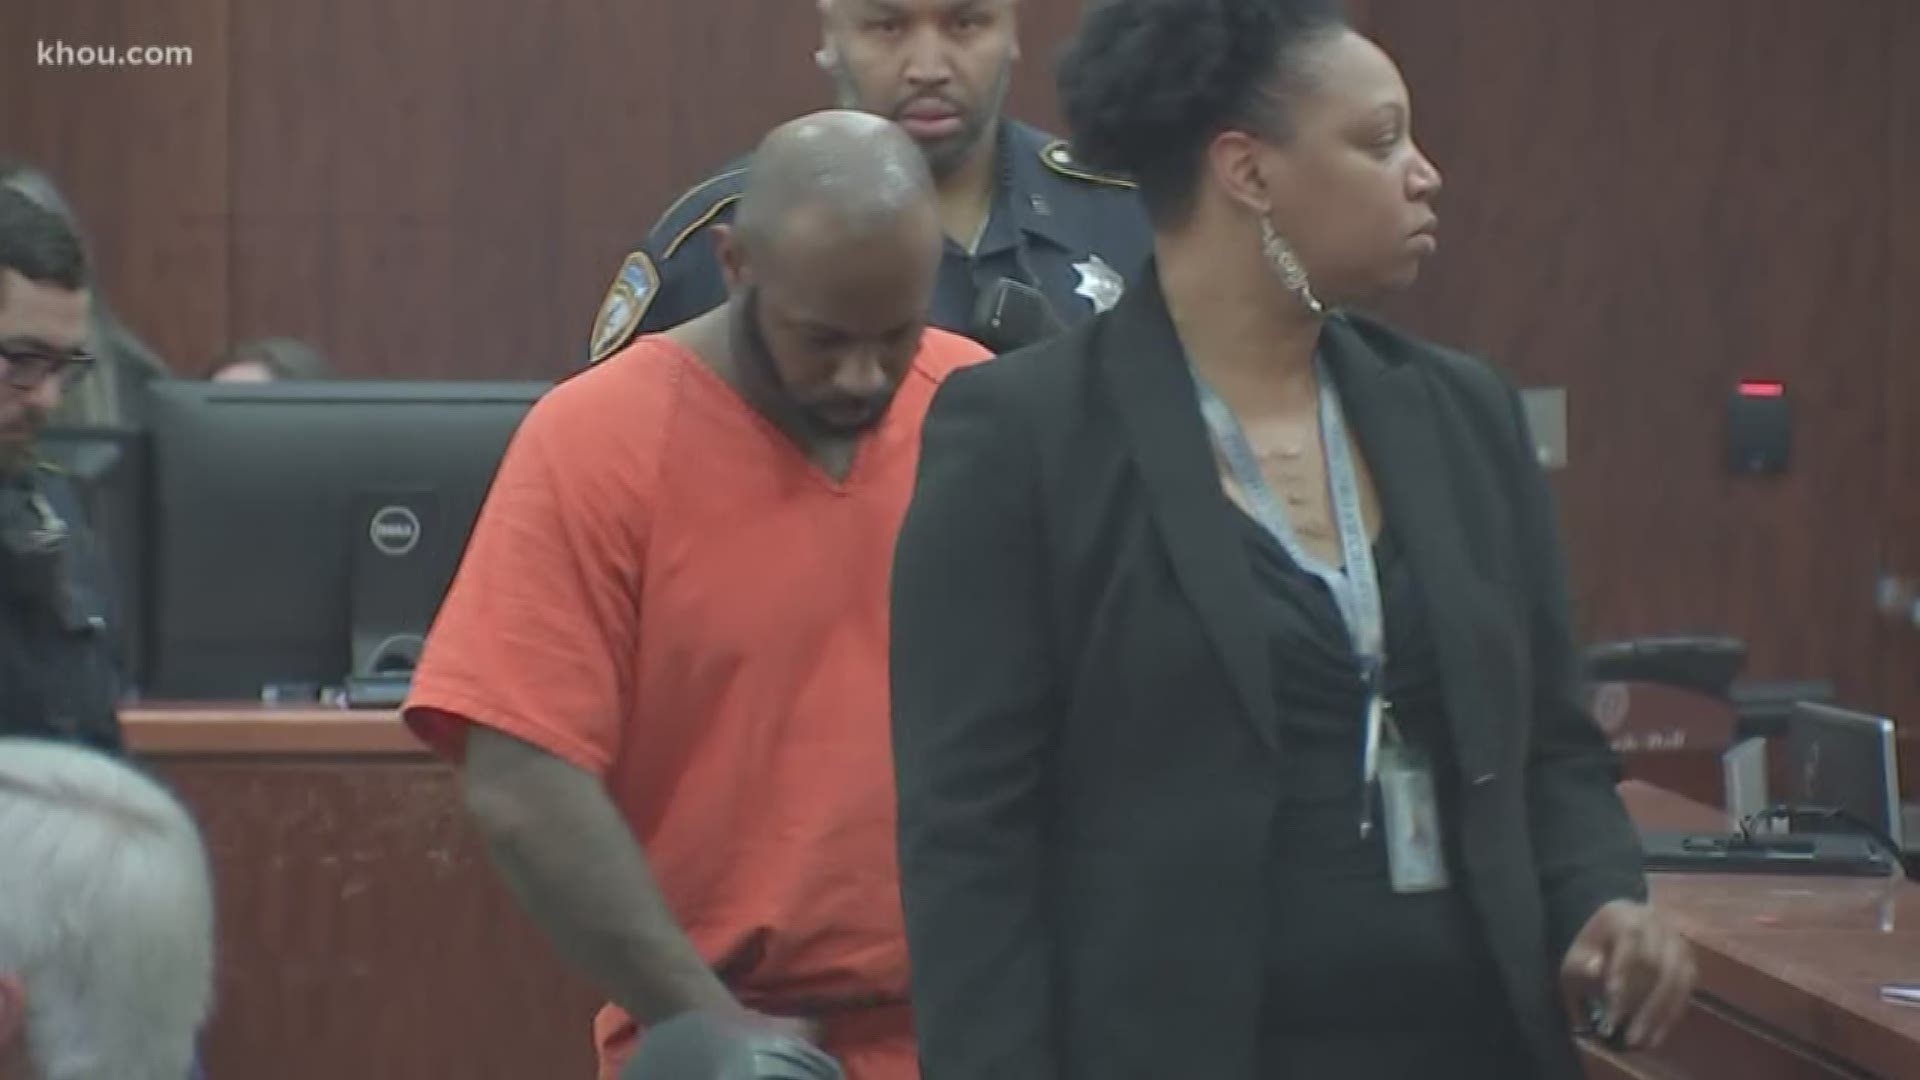 A judge increased the bond for a murder suspect accused of shooting and killing his fiancée just three days after he proposed to her.